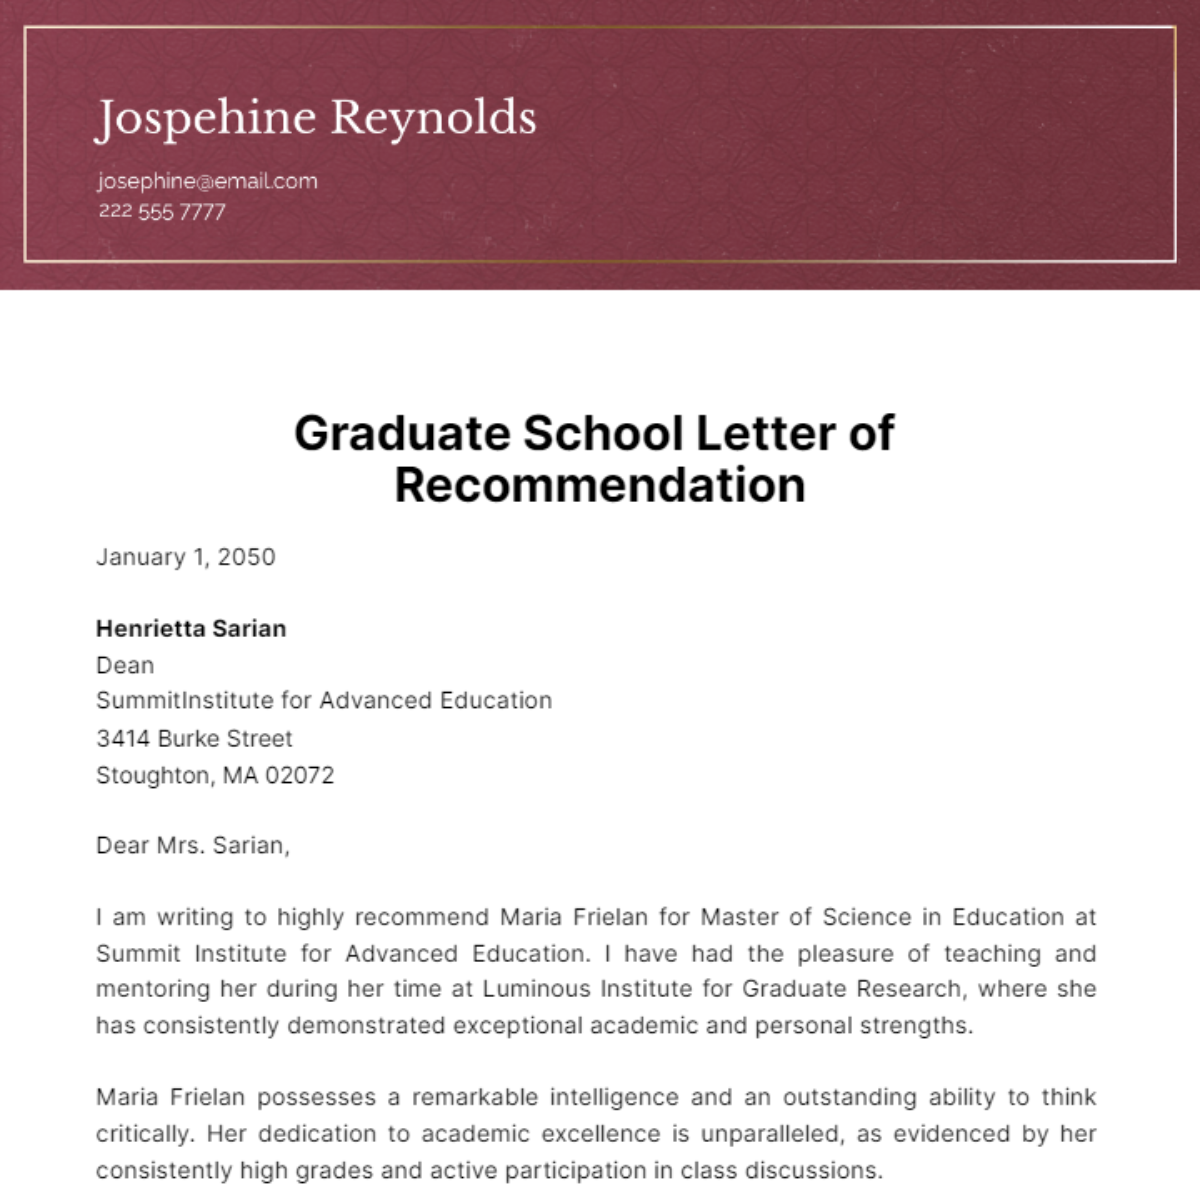 Graduate School Letter of Recommendation Template